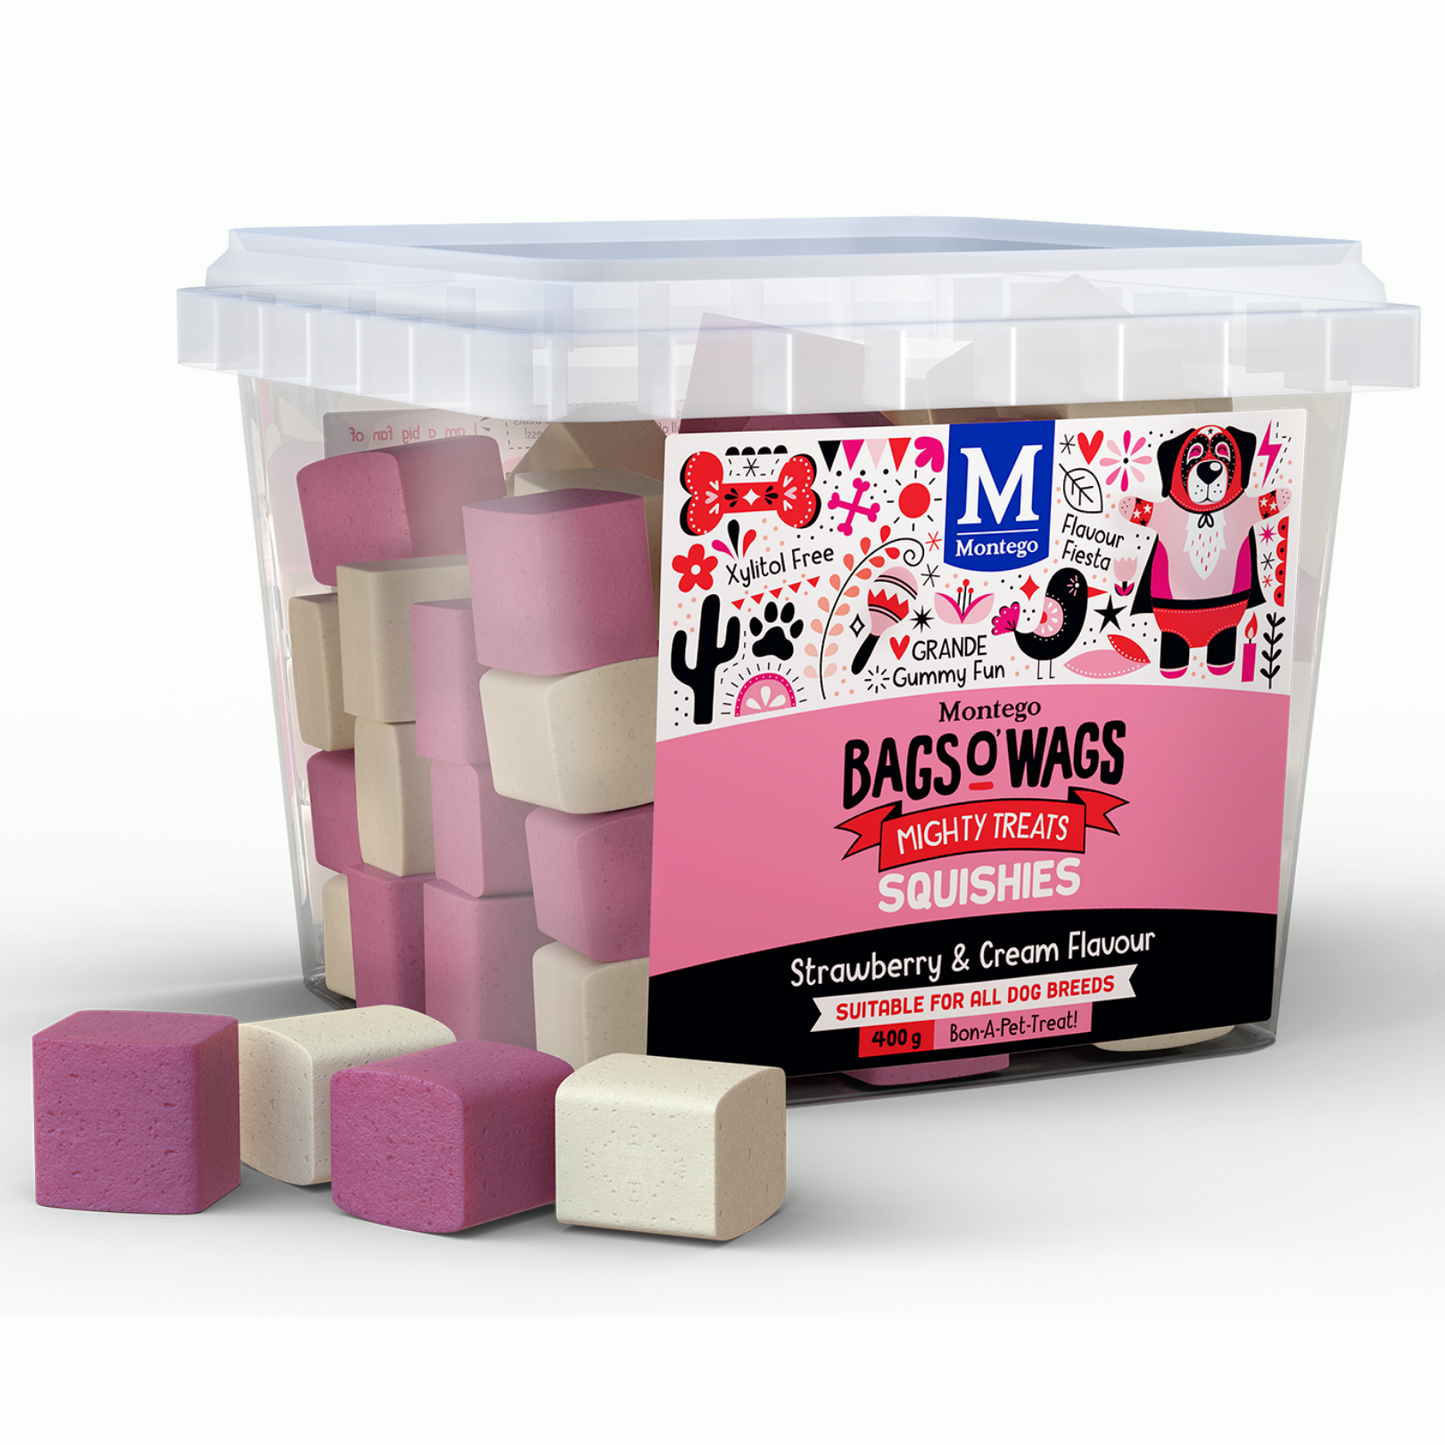 Montego  Bags O' Wags Squishies 500g